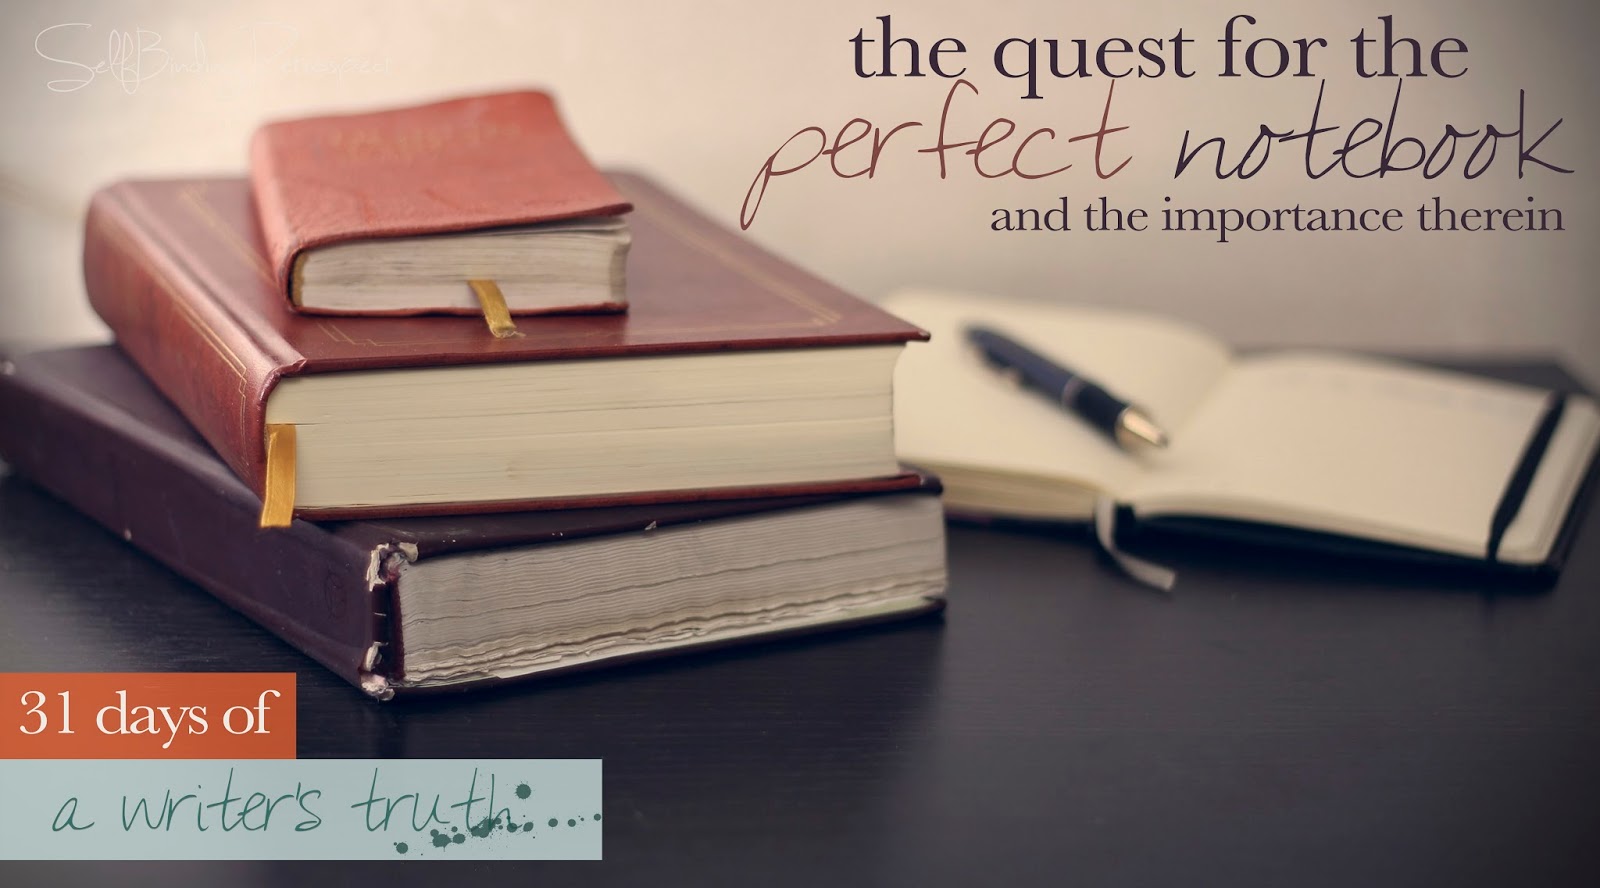 the quest for the perfect notebook #write31days